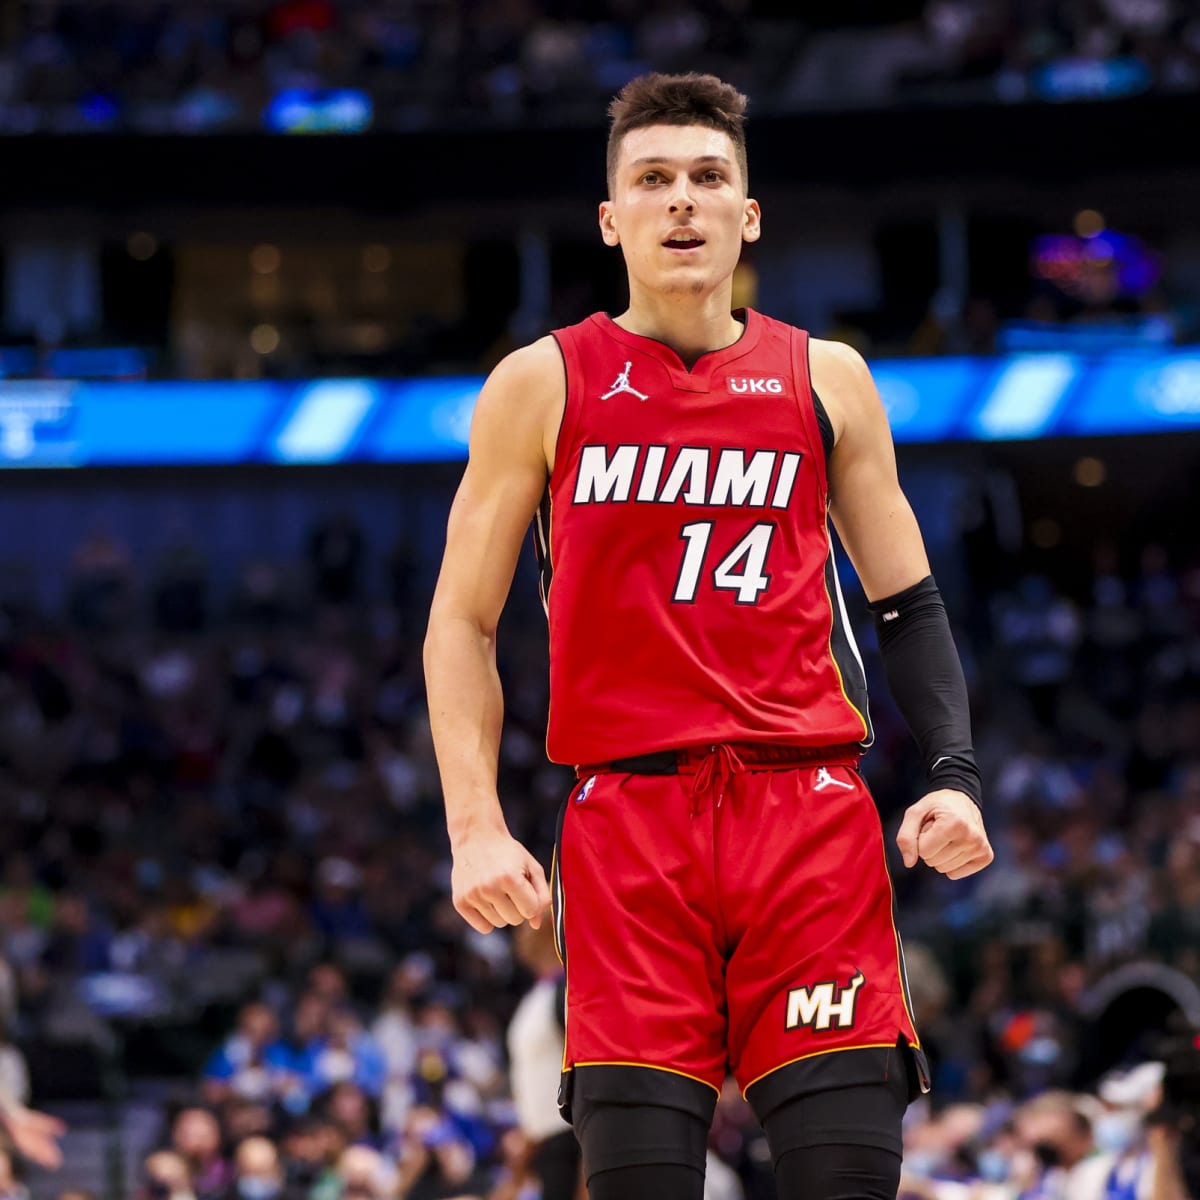 Injury Update: Miami Heat’s star Tyler Herro has disastrous ankle sprain, out at least 2 weeks…